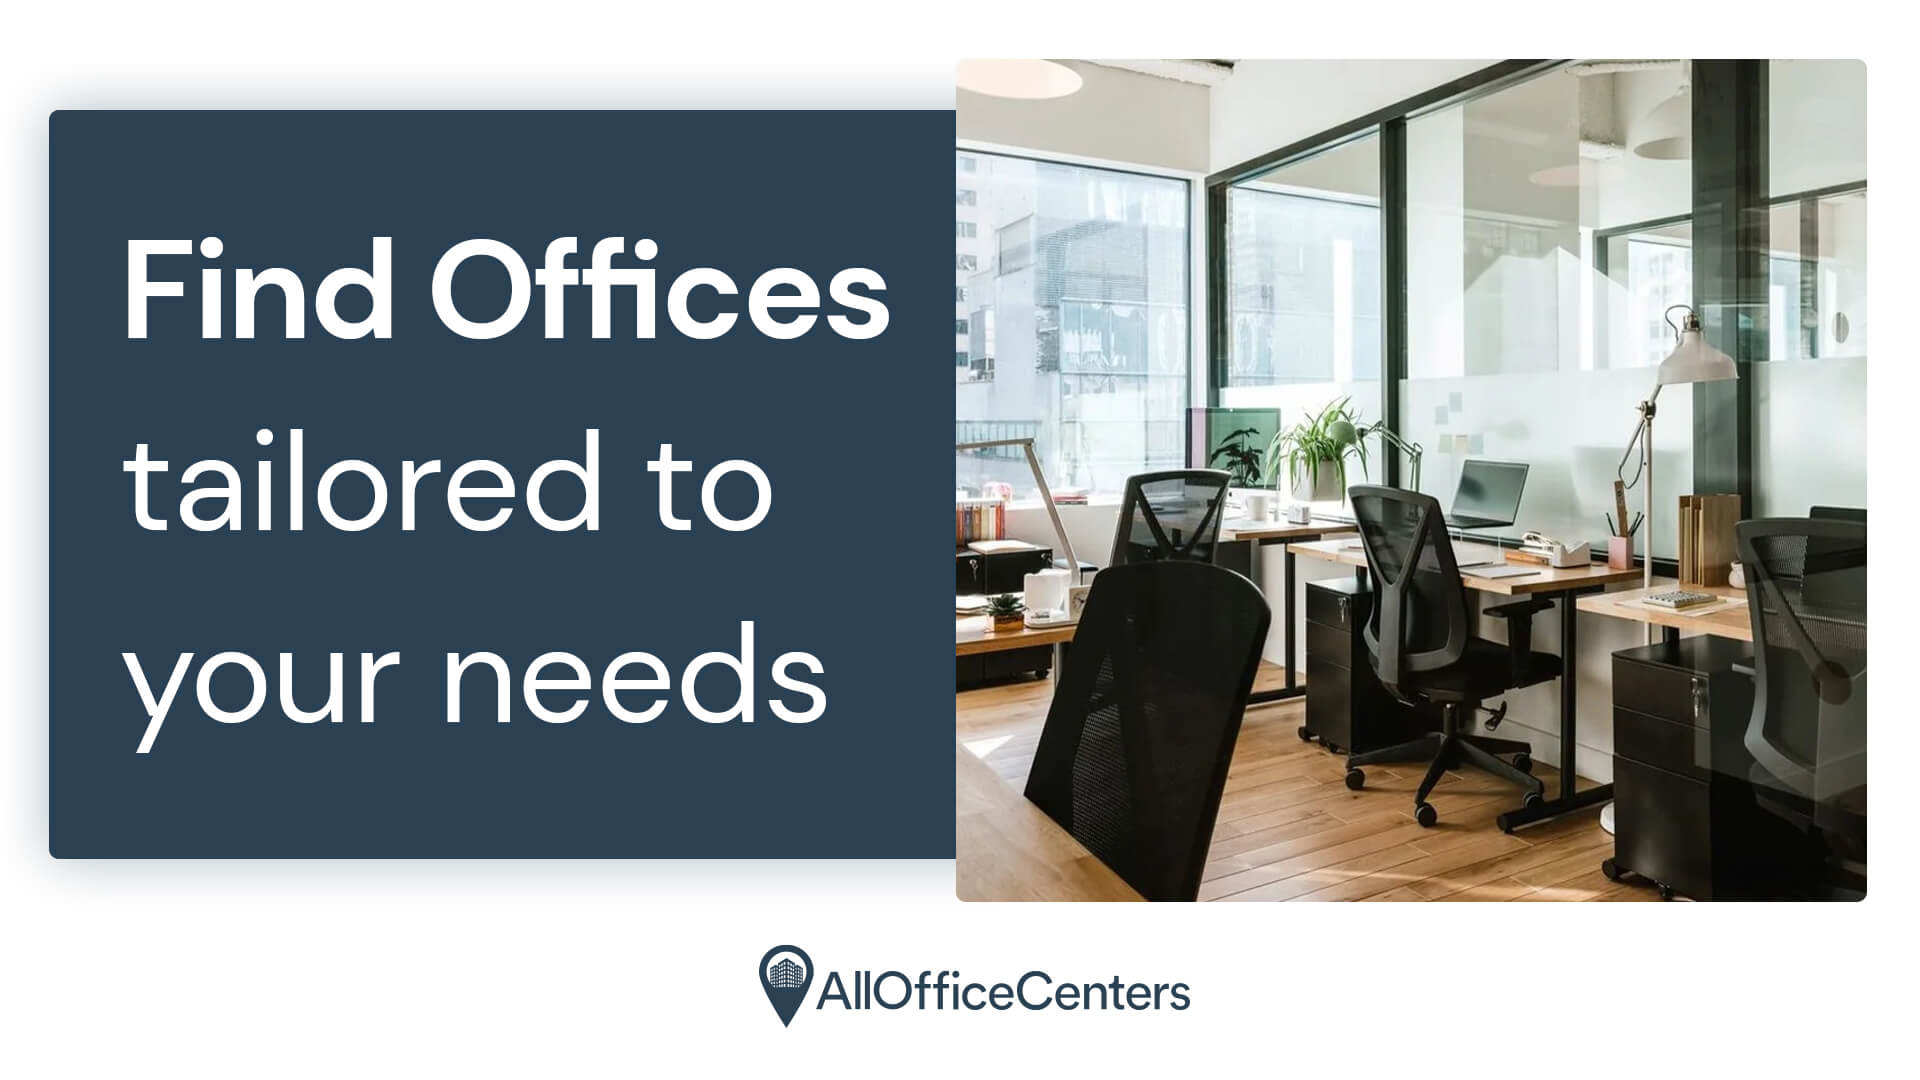 Flexible Office Space for Rent | Free Consultation | AllOfficeCenters